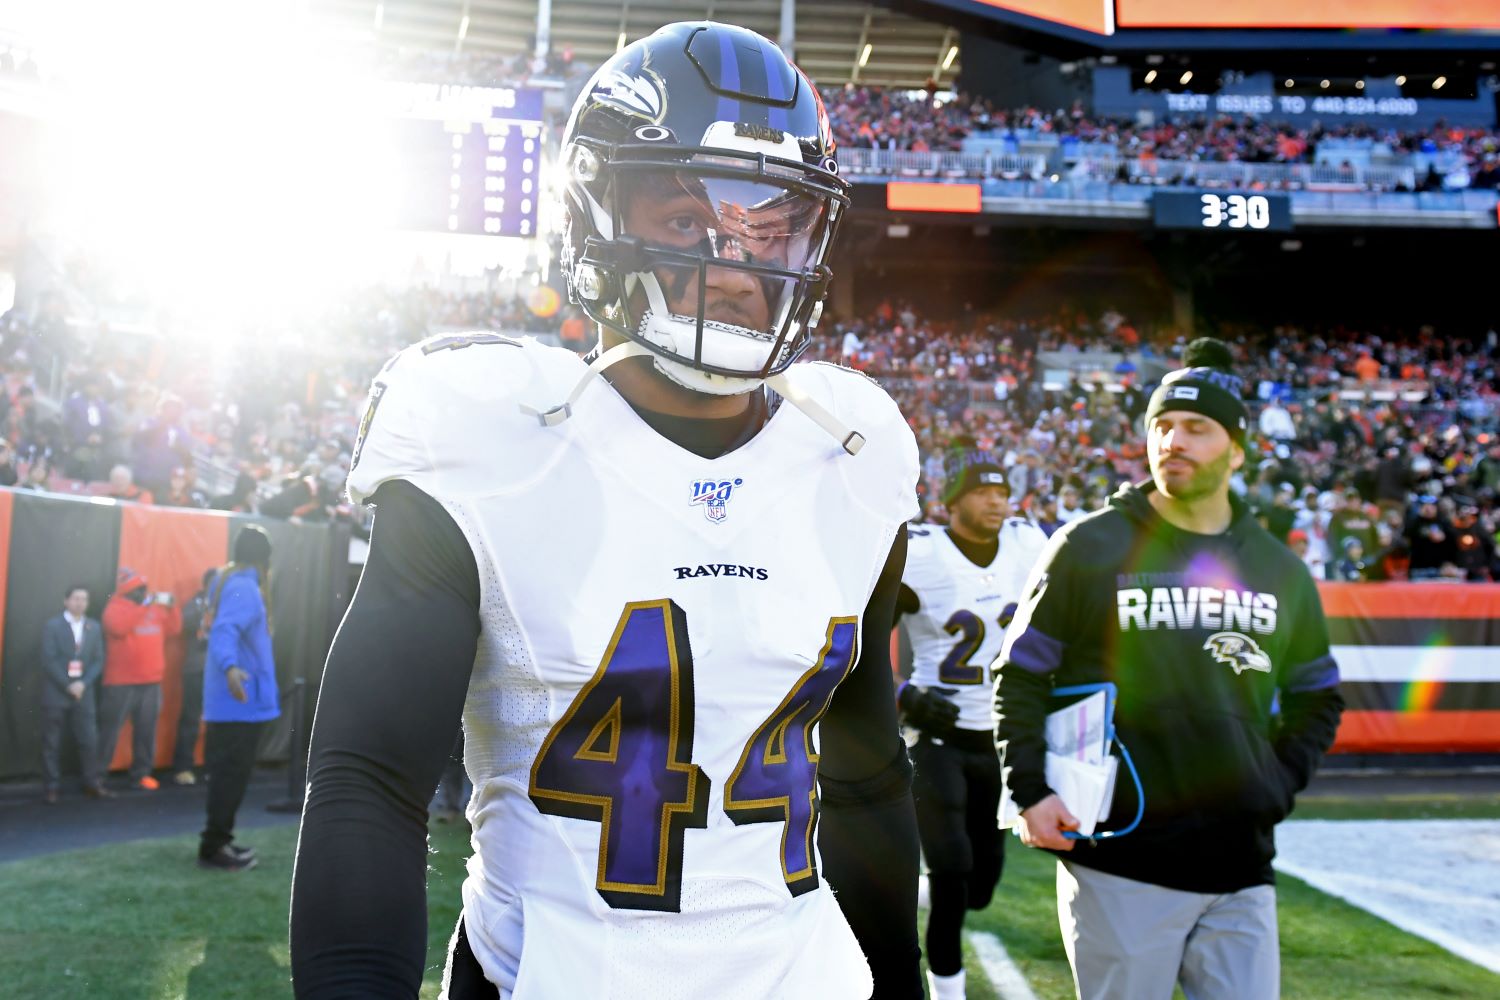 With Marlon Humphrey testing positive for COVID-19, the Baltimore Ravens may be without their $97 million star against the Colts.